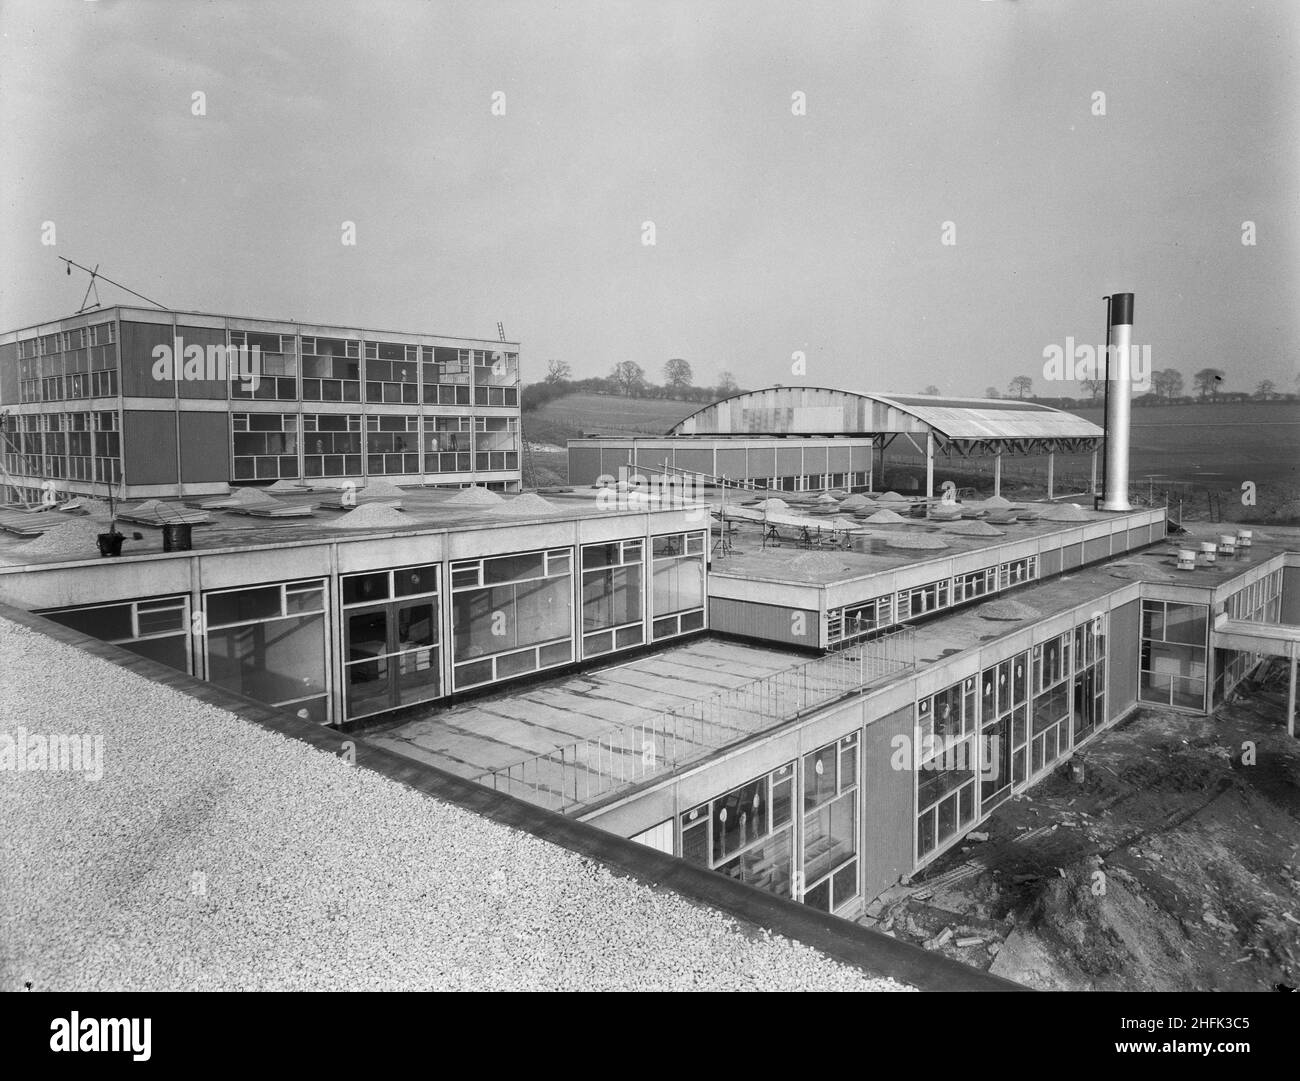 County High School, Gedling Road, Arnold, Gedling, Nottinghamshire, 23/02/1959. A view from the roof of Arnold County High School, looking towards the science block and 'barn-roof' covered athletics space. Whilst the gymnasium at the school was comparatively small it was equipped with a covered outdoor space of 8,000 sq ft for games practice. This area was roofed with a curved 'Dutch Barn' style corrugated iron structure but otherwise open to the outside. Stock Photo